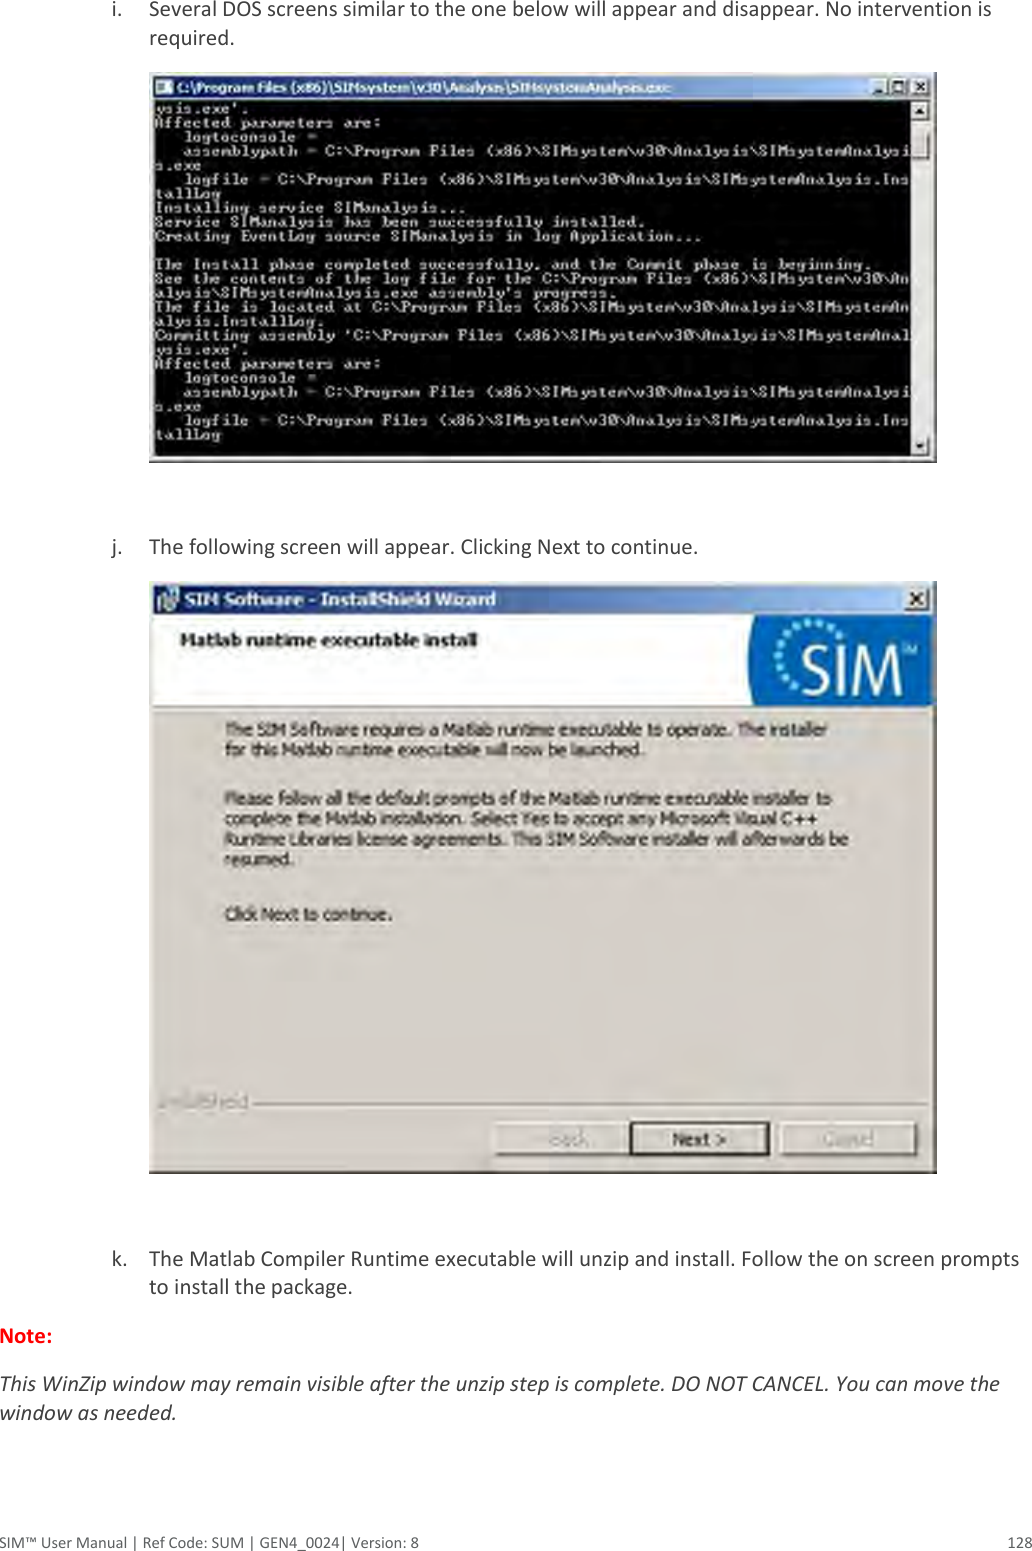  SIM™ User Manual | Ref Code: SUM | GEN4_0024| Version: 8  128  i. Several DOS screens similar to the one below will appear and disappear. No intervention is required.     j. The following screen will appear. Clicking Next to continue.   k. The Matlab Compiler Runtime executable will unzip and install. Follow the on screen prompts to install the package.   Note:   This WinZip window may remain visible after the unzip step is complete. DO NOT CANCEL. You can move the window as needed. 